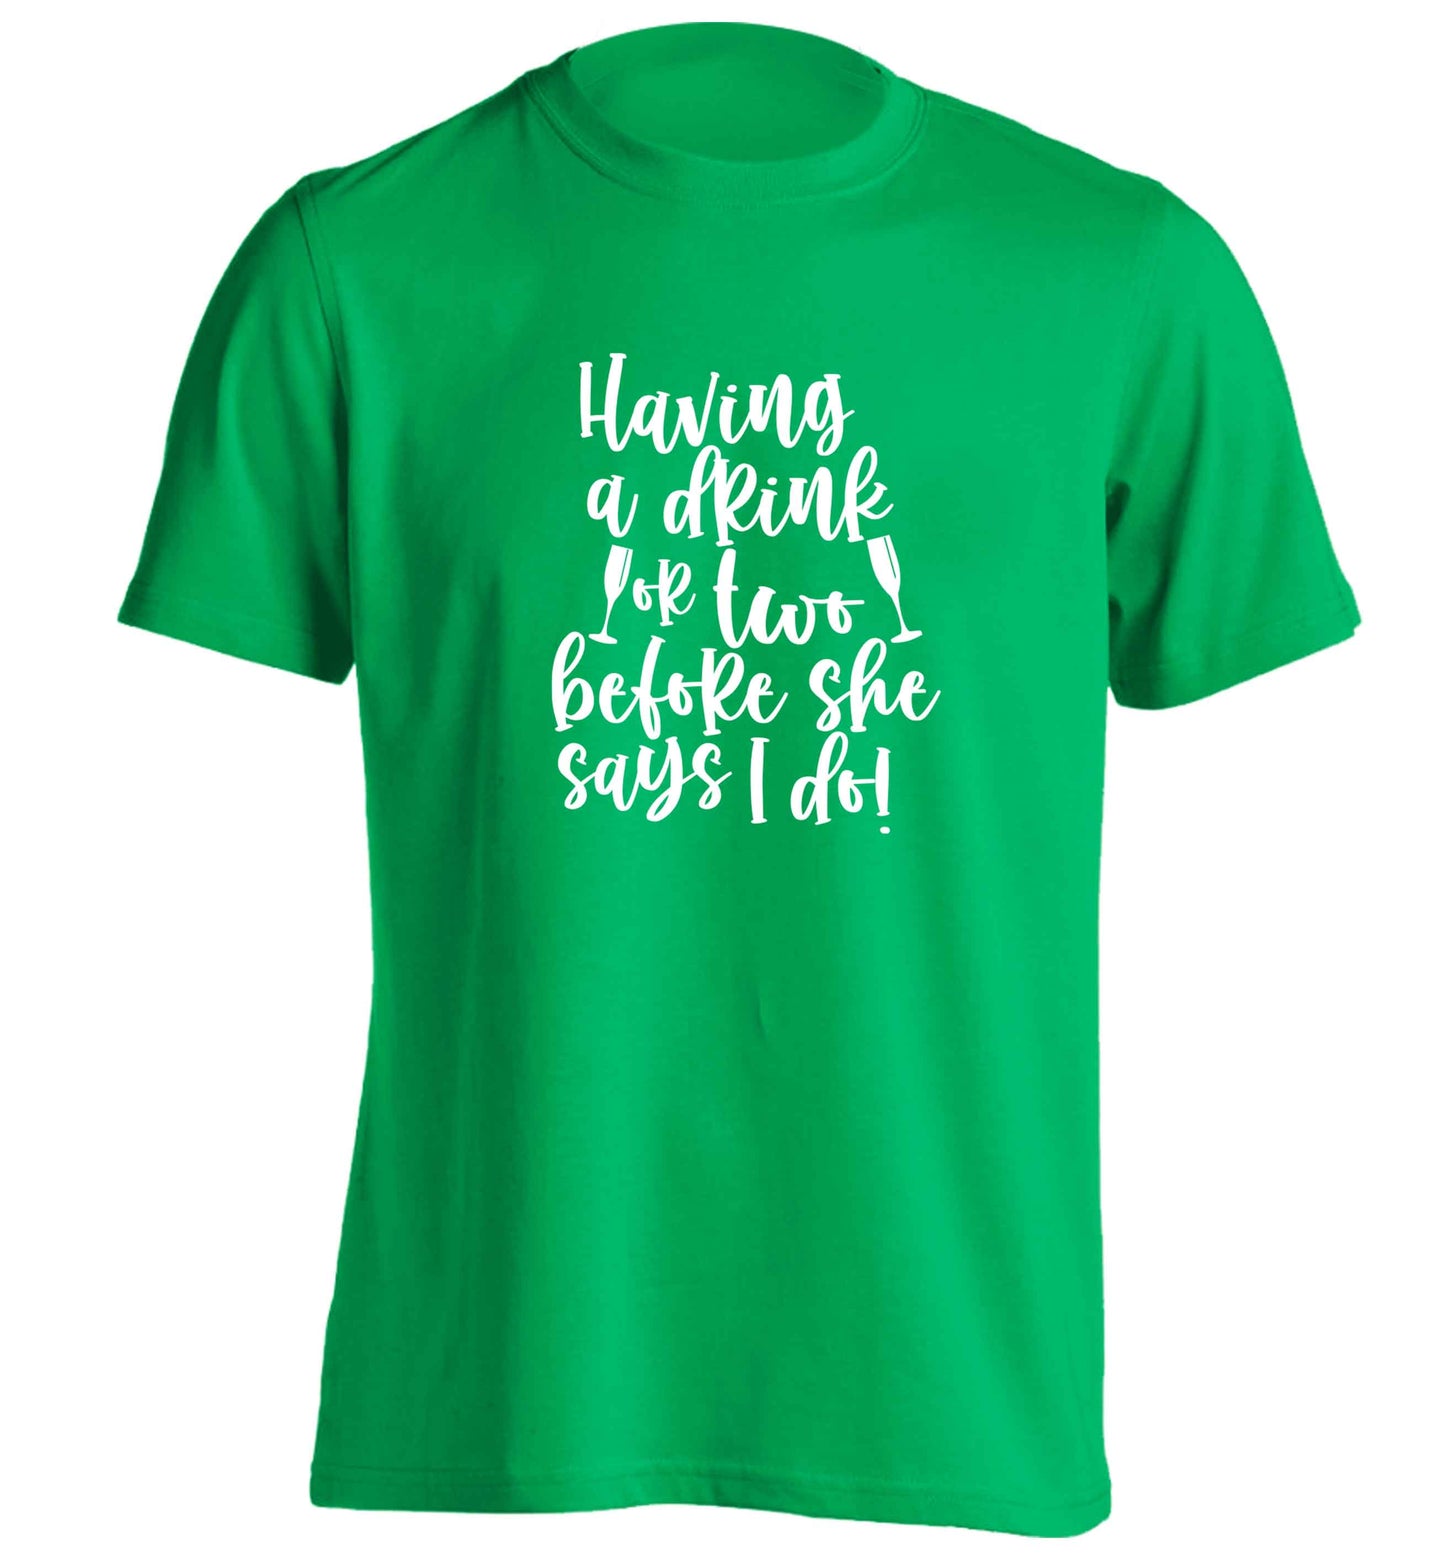 Having a drink or two before she says I do adults unisex green Tshirt 2XL